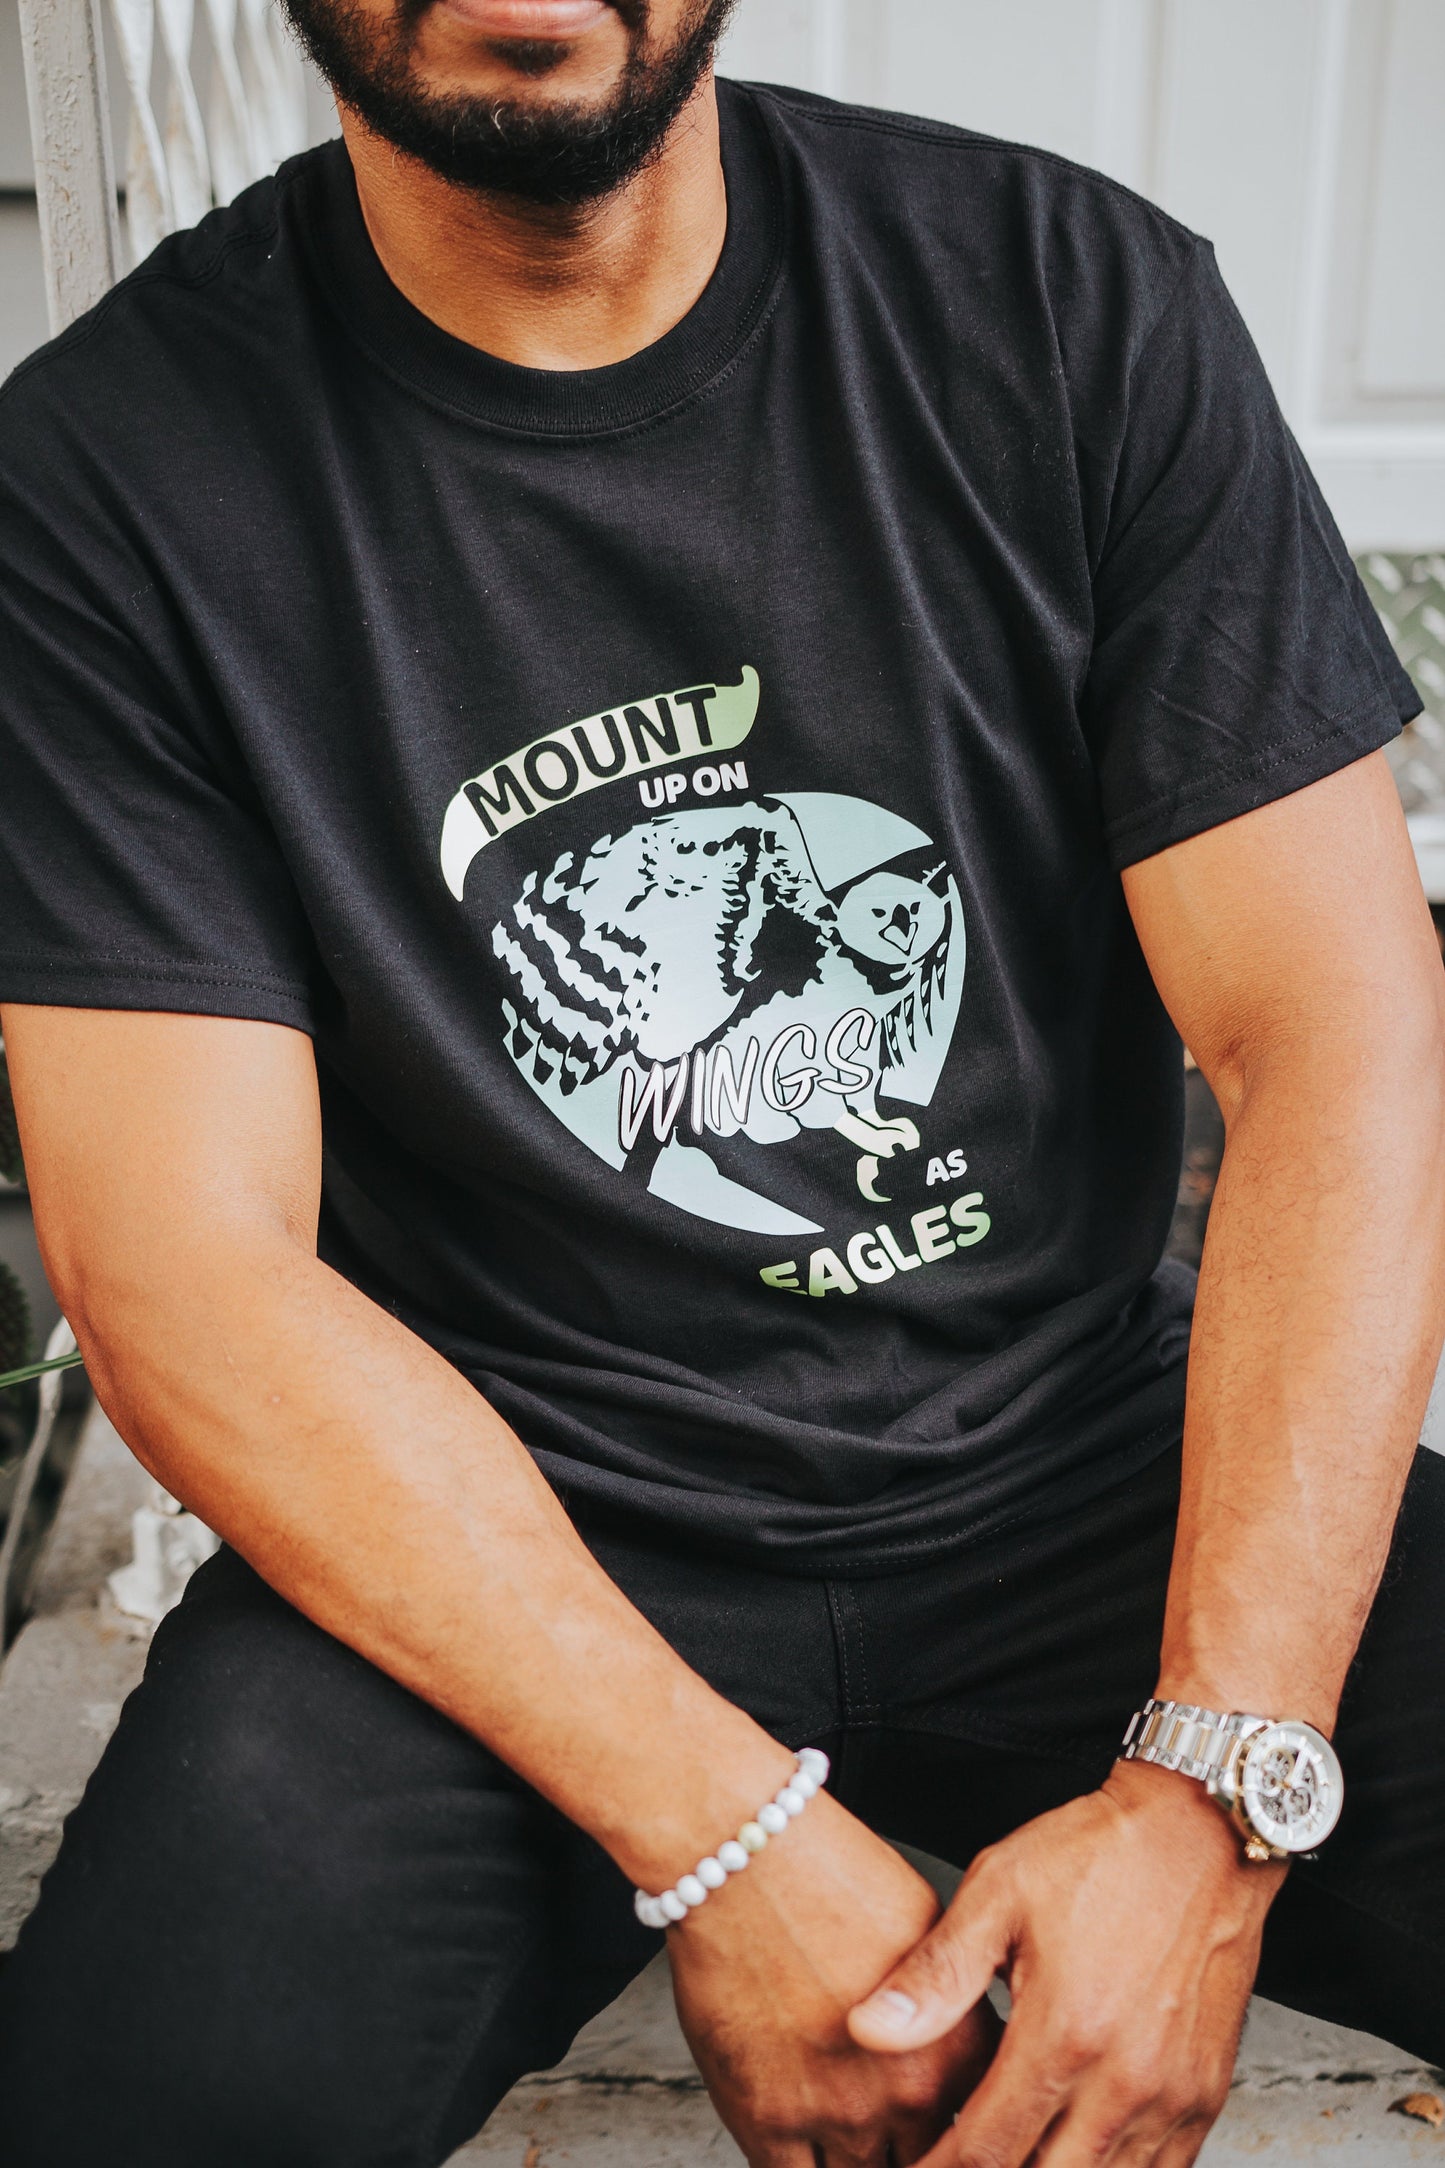 Eagles wings shirt, gift for him, Christian Tee, Christian Shirt Gift, Jesus Shirt, Religious Apparel, Church Shirts, Christian Tee for Men